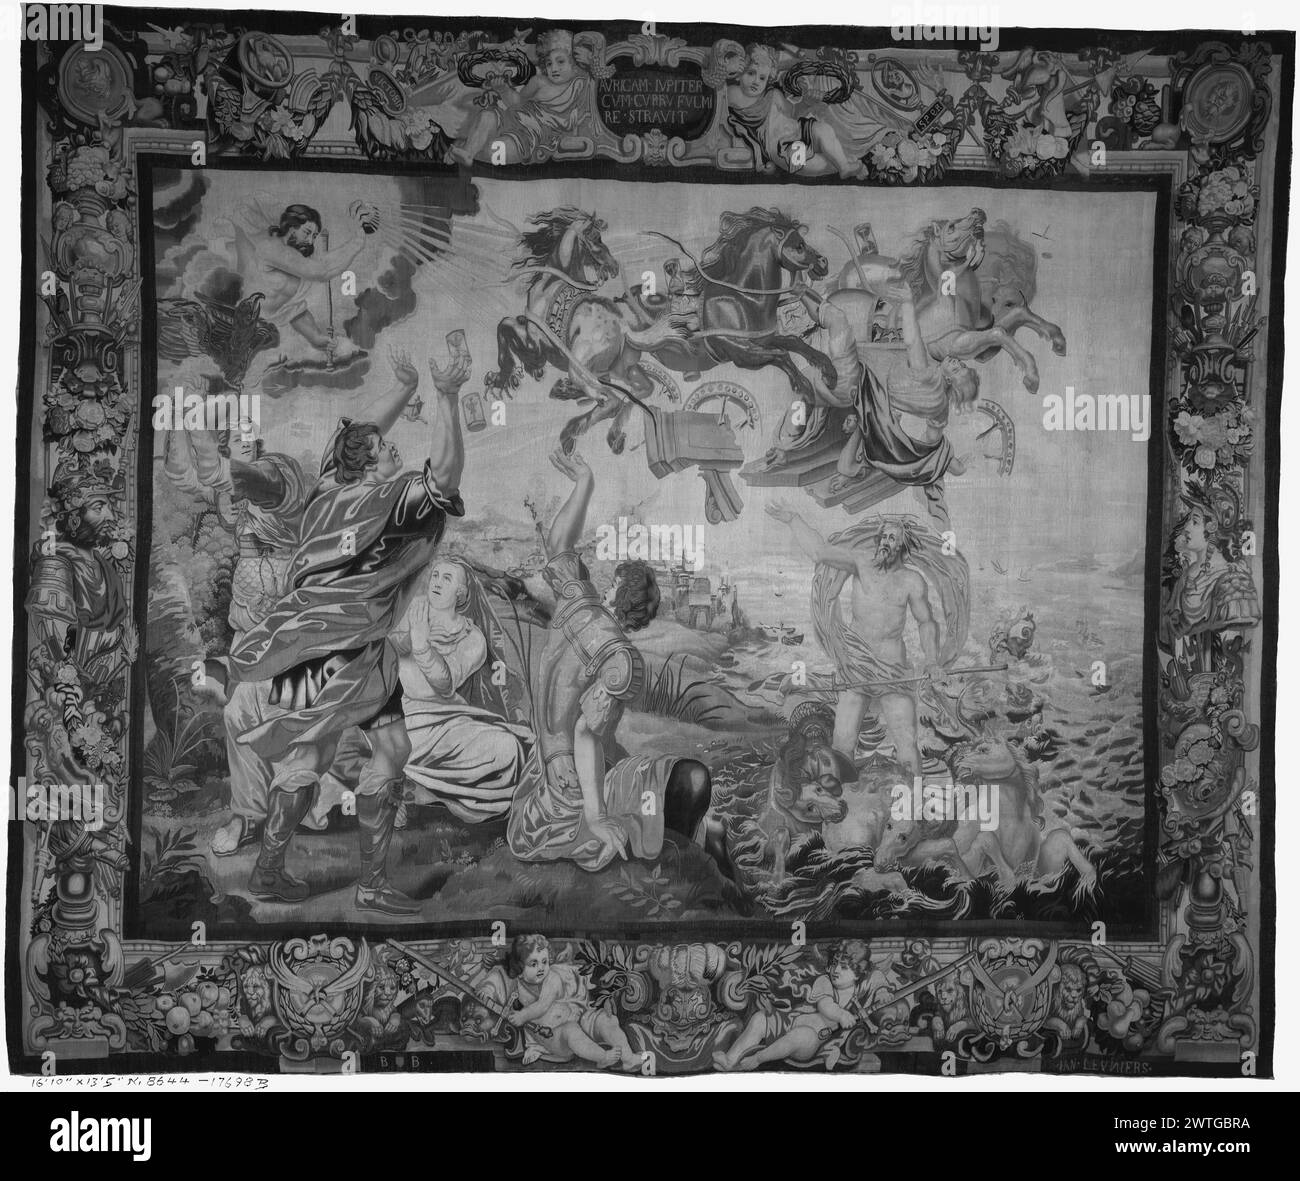 Fall of Phaethon. Leyniers, Jan (Flemish, 1630-1686) (workshop) [weaver] c. 1650-1675 Tapestry Dimensions: H 13'5' x W 16'10' Tapestry Materials/Techniques: unknown Culture: Flemish Weaving Center: Brussels Ownership History: French & Co. purchased from J. P. Morgan, invoiced 11/25/1932 [SS 17698]. Inscriptions: City mark in lower guard, left side Inscriptions: Woven signature in lower guard, R: IAN.LEYNIERS Inscriptions: Inscription in upper border, central cartouche: AVRICAM.IVPTER / CVM.CVRRV.FVLMI / RE.STRAVIT Inscriptions: Inscription in upper border, L: VICTORIA Inscriptions: Inscription Stock Photo